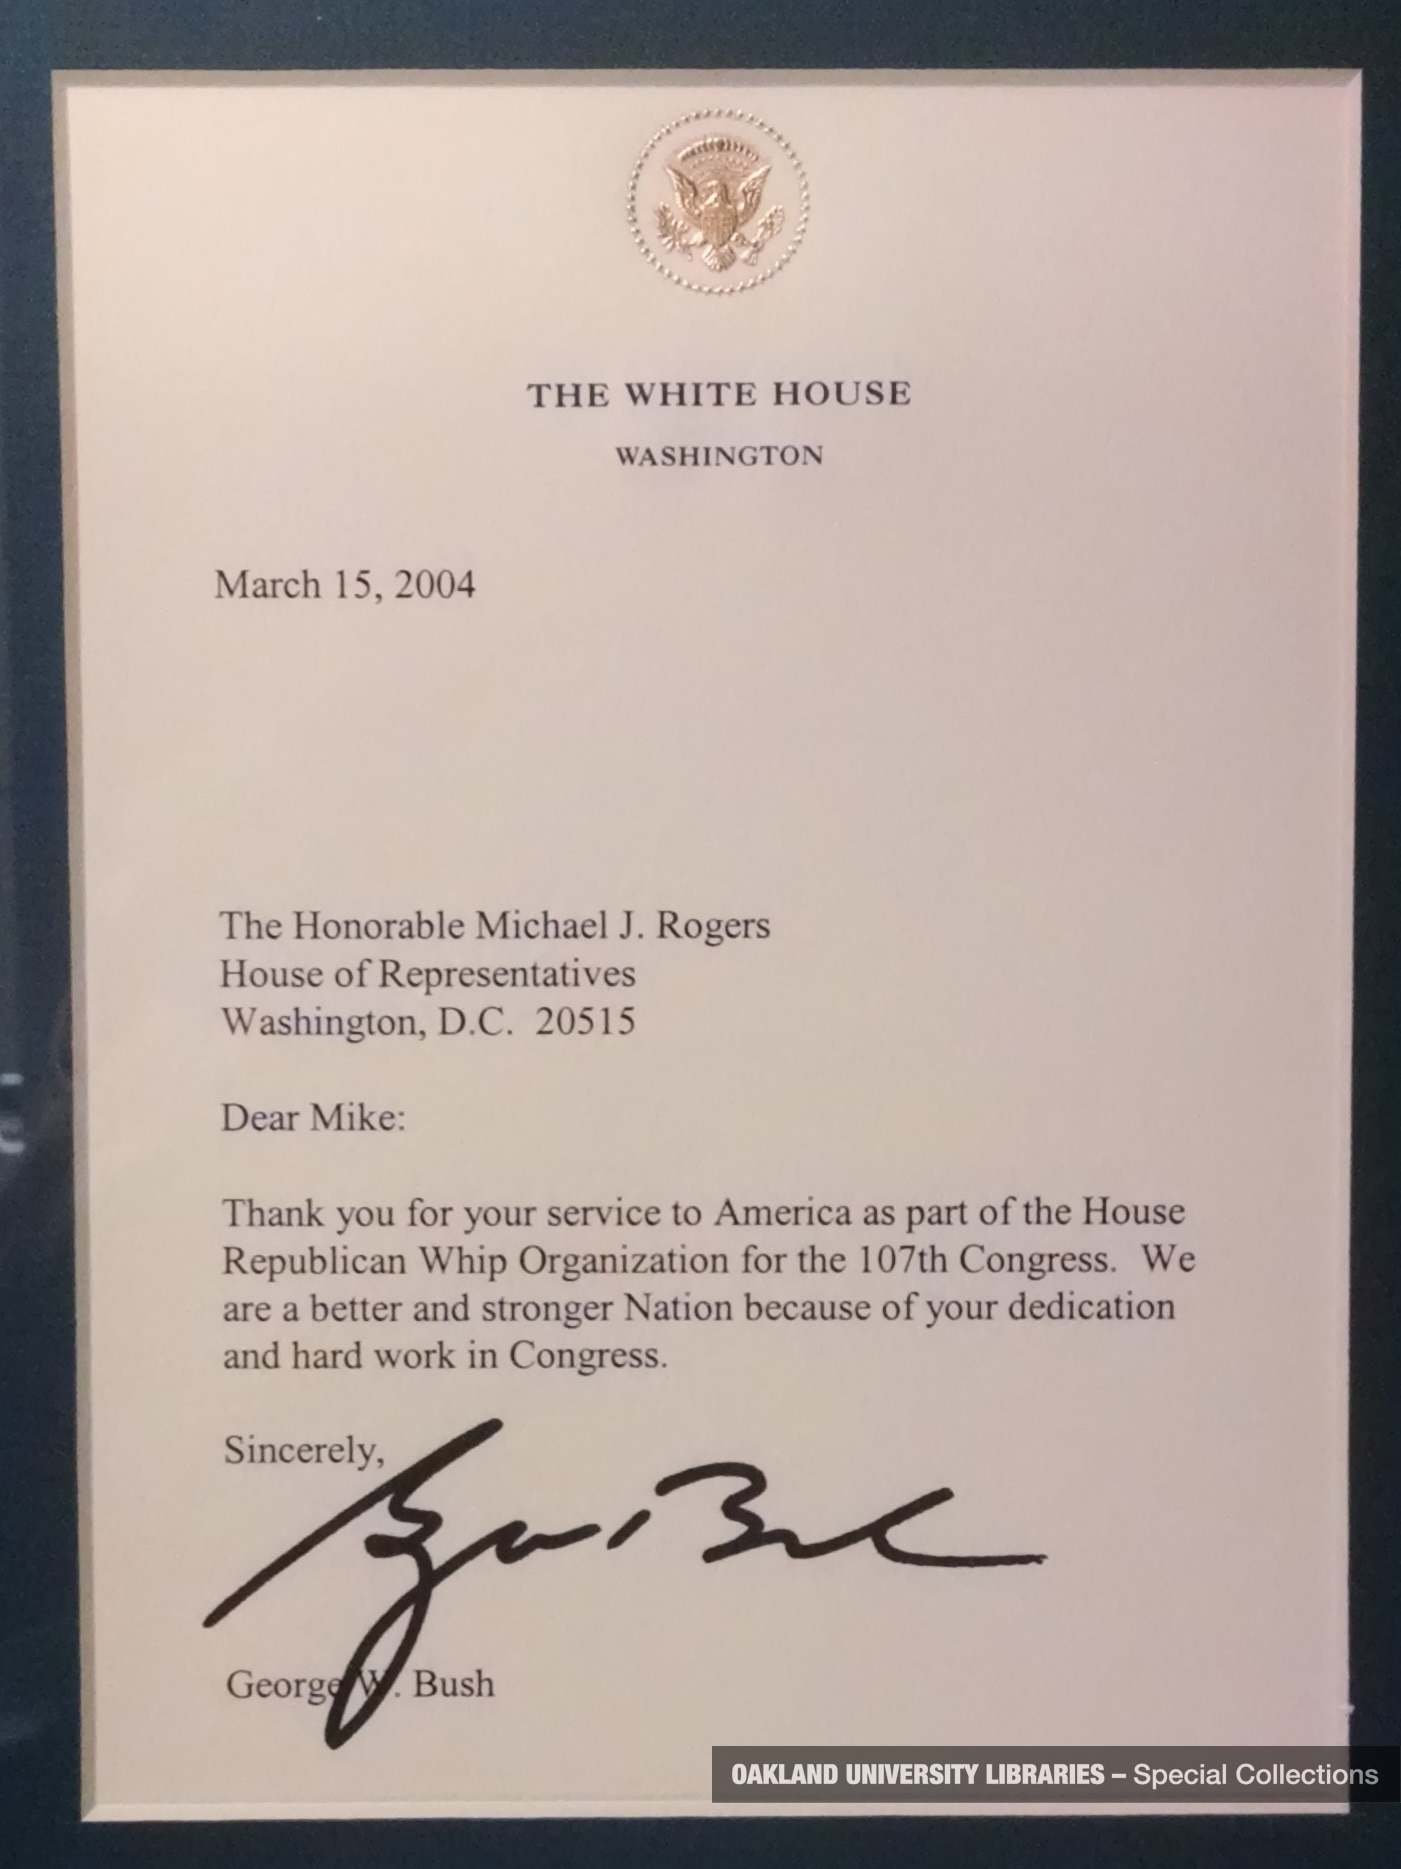 Thank you letter sent by President Bush to Congressman Rogers for service in the 107th Congress